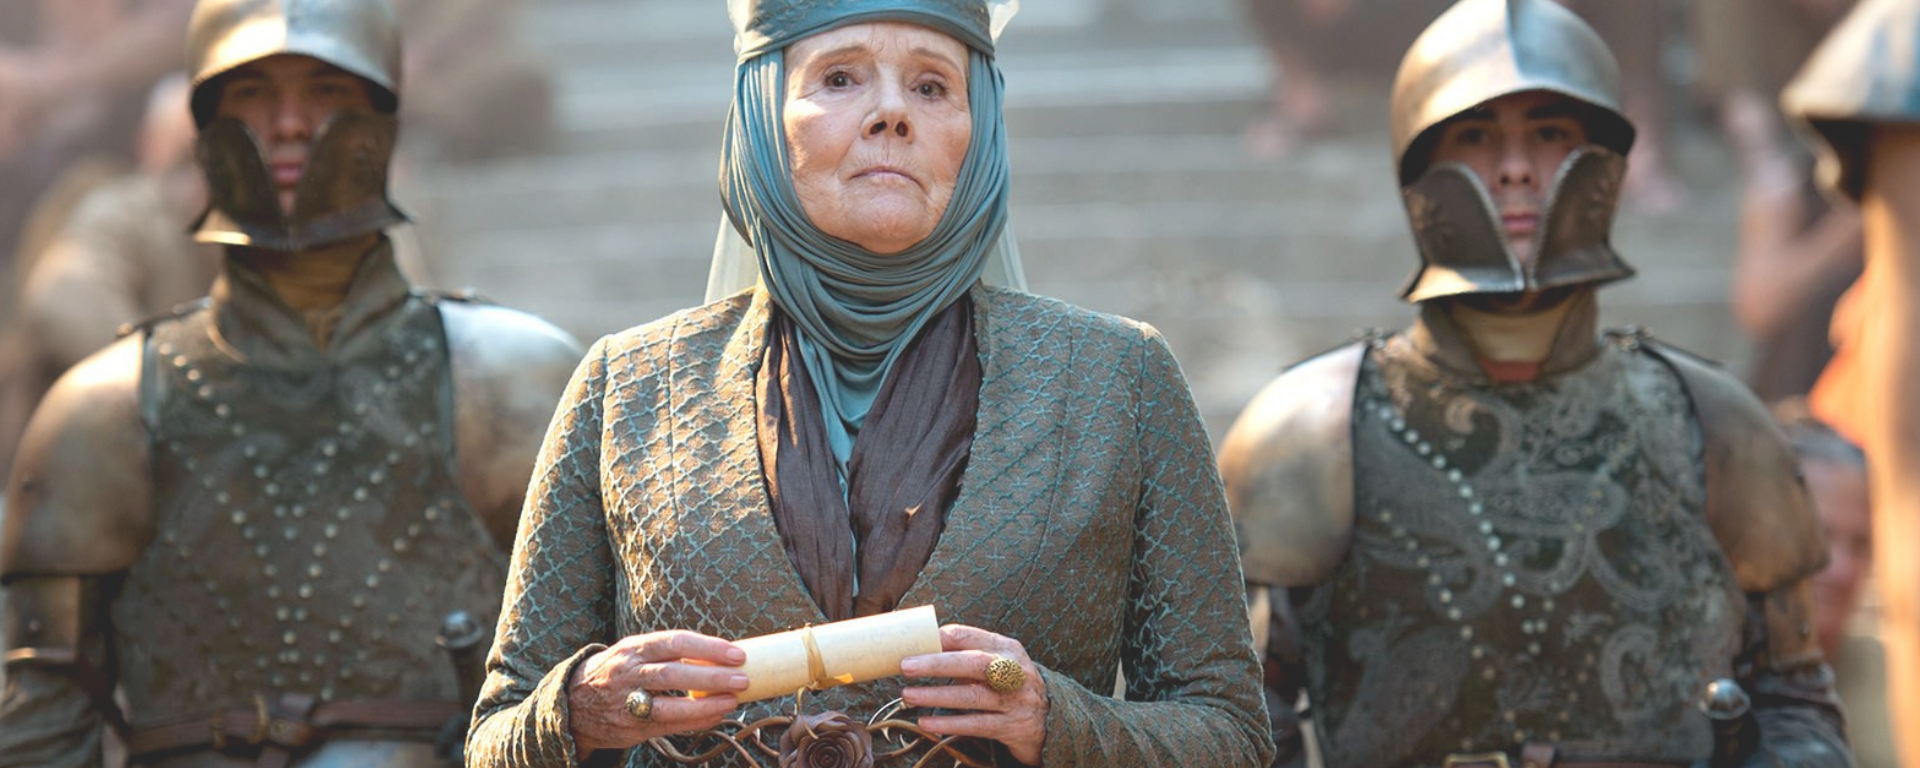 Dame Diana Rigg starred as Lady Olenna Tyrell, AKA the Queen of Thorns, in HBO's "Game of Thrones."